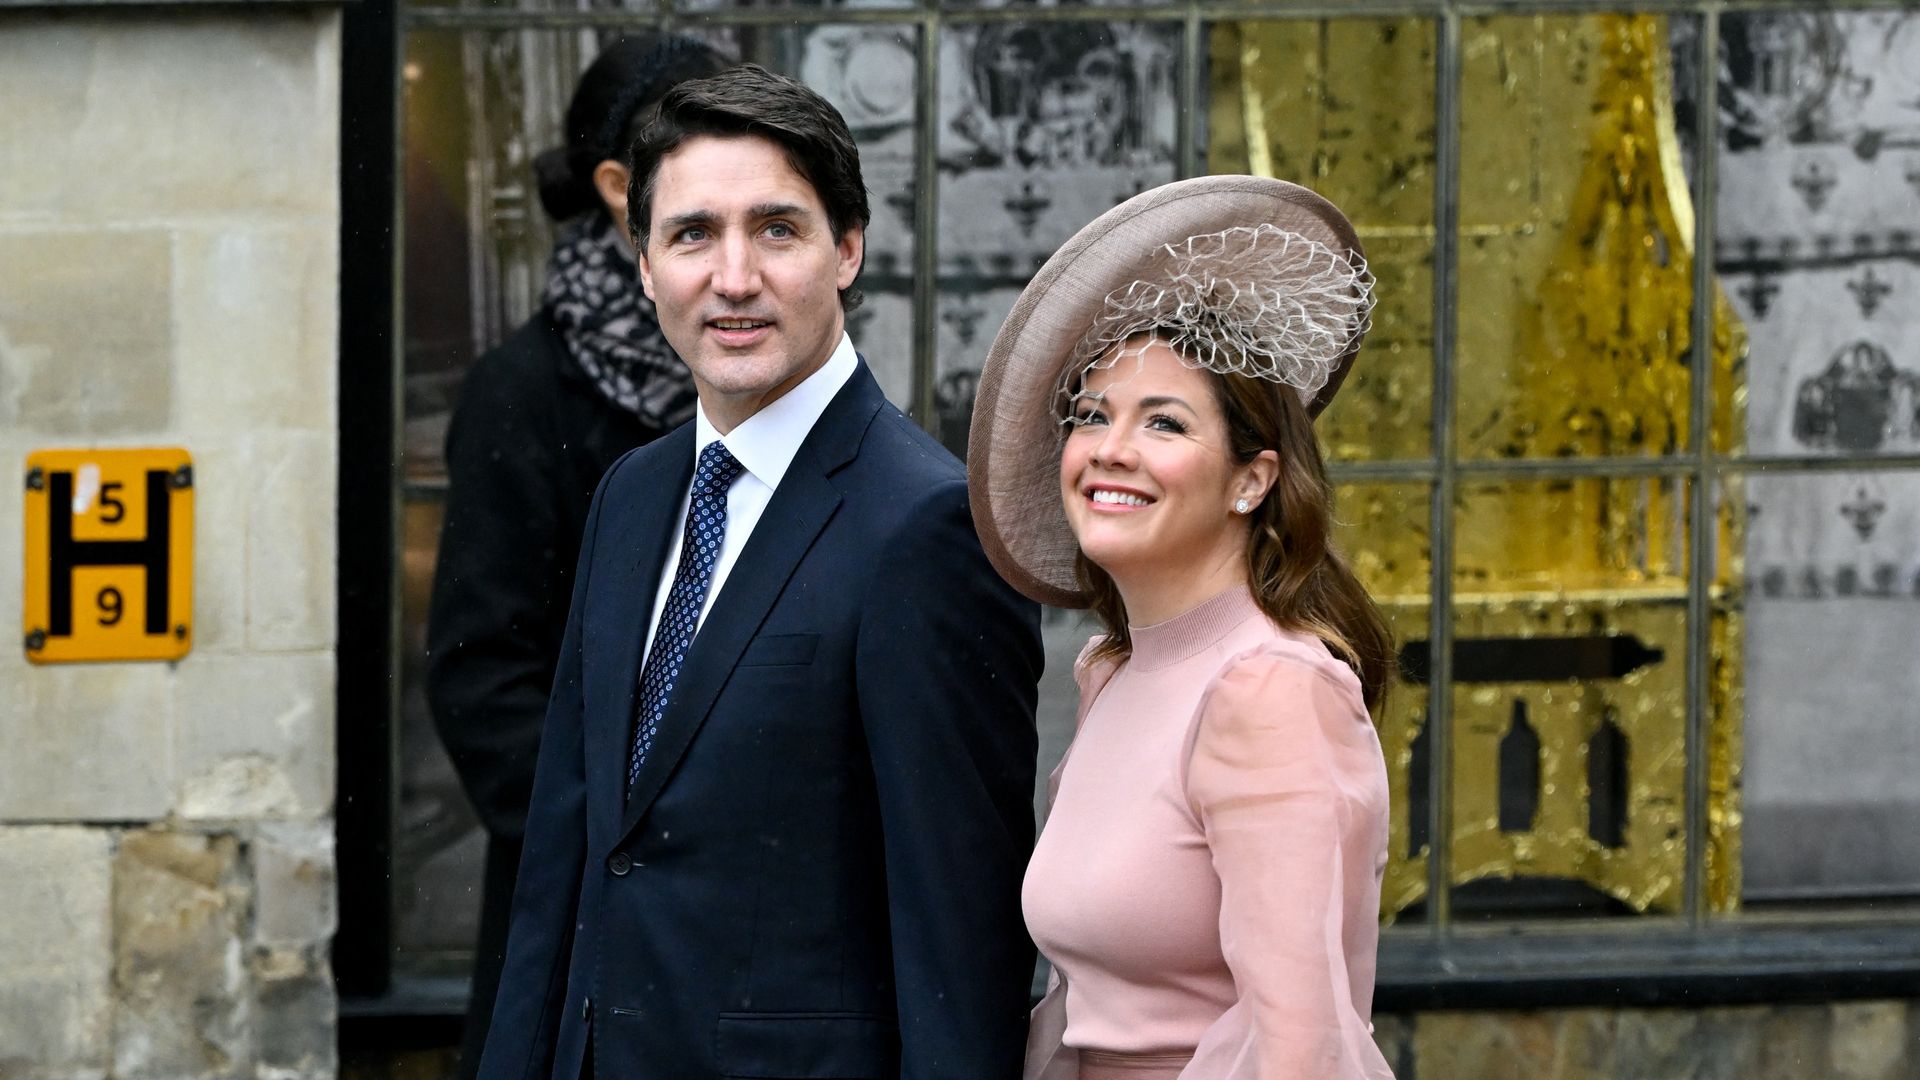 Canadian prime minister Justin Trudeau and wife Sophie Trudeau